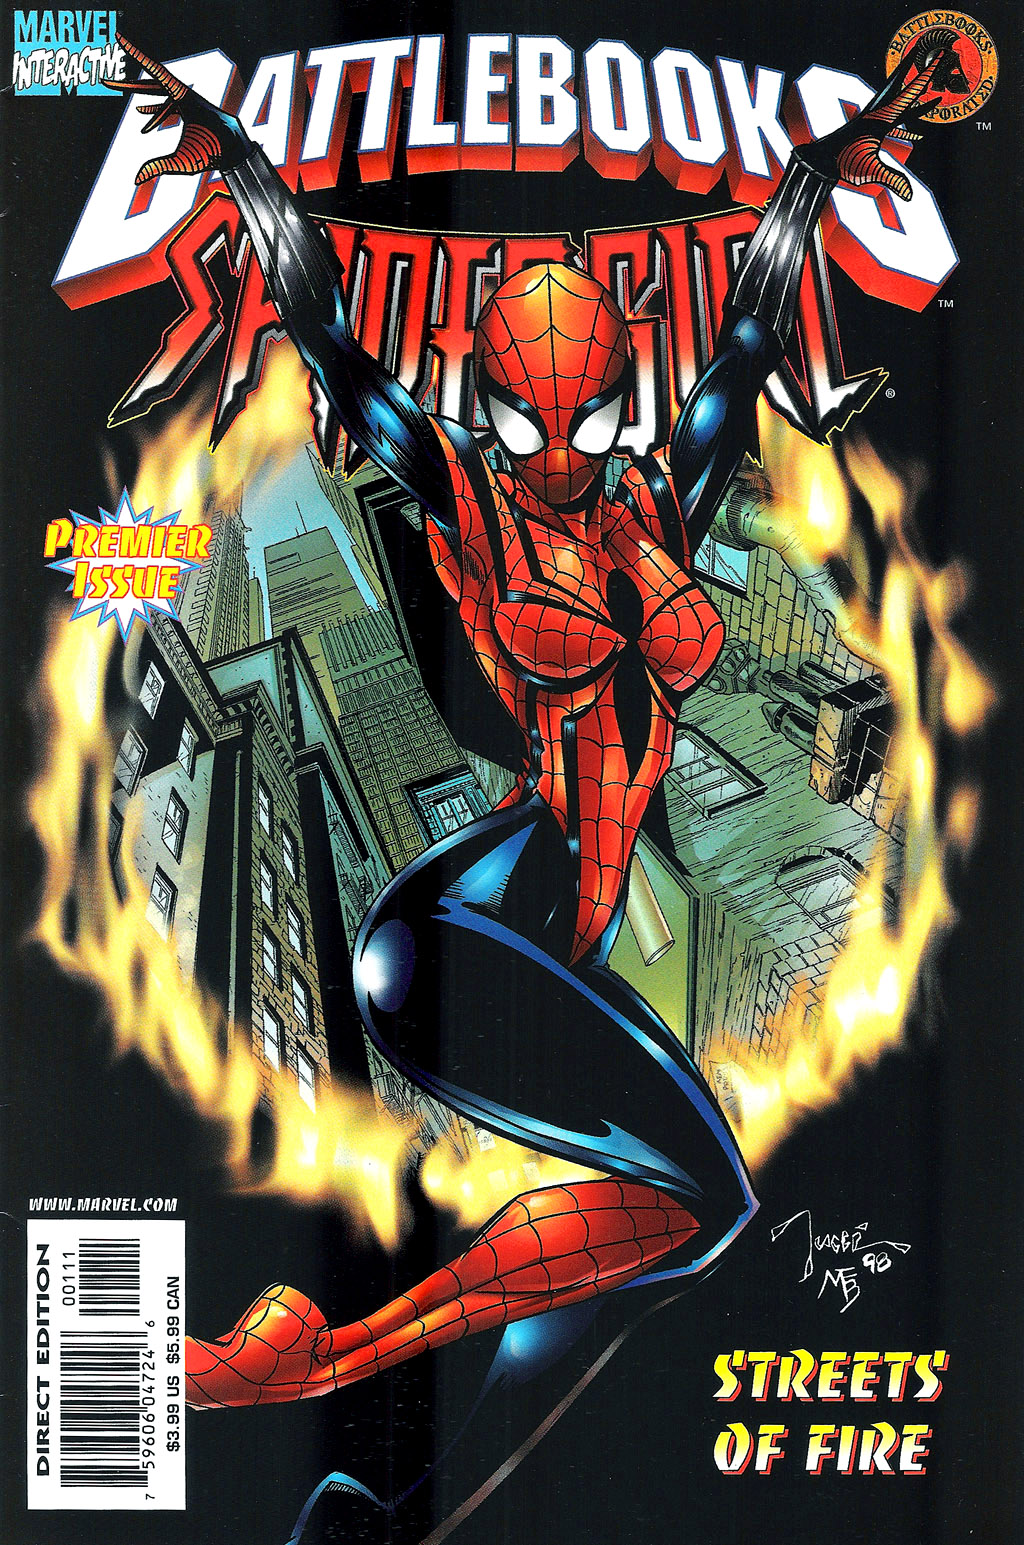 Read online Spider-Man Battlebook: Streets of Fire comic -  Issue # Full - 1